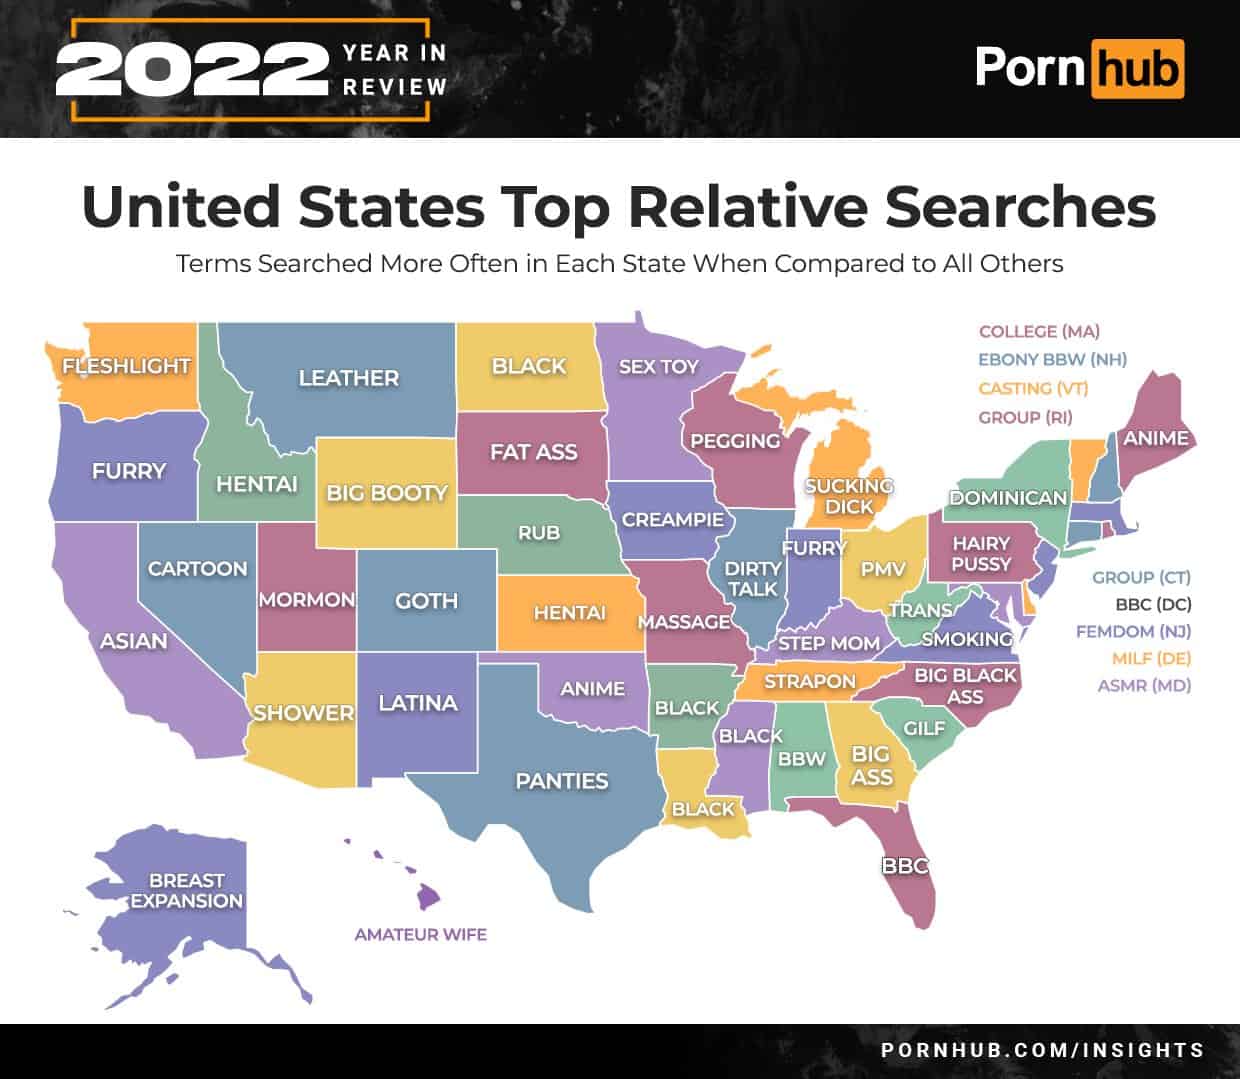 pornhub insights 2022 year in review united states relative searches by state map